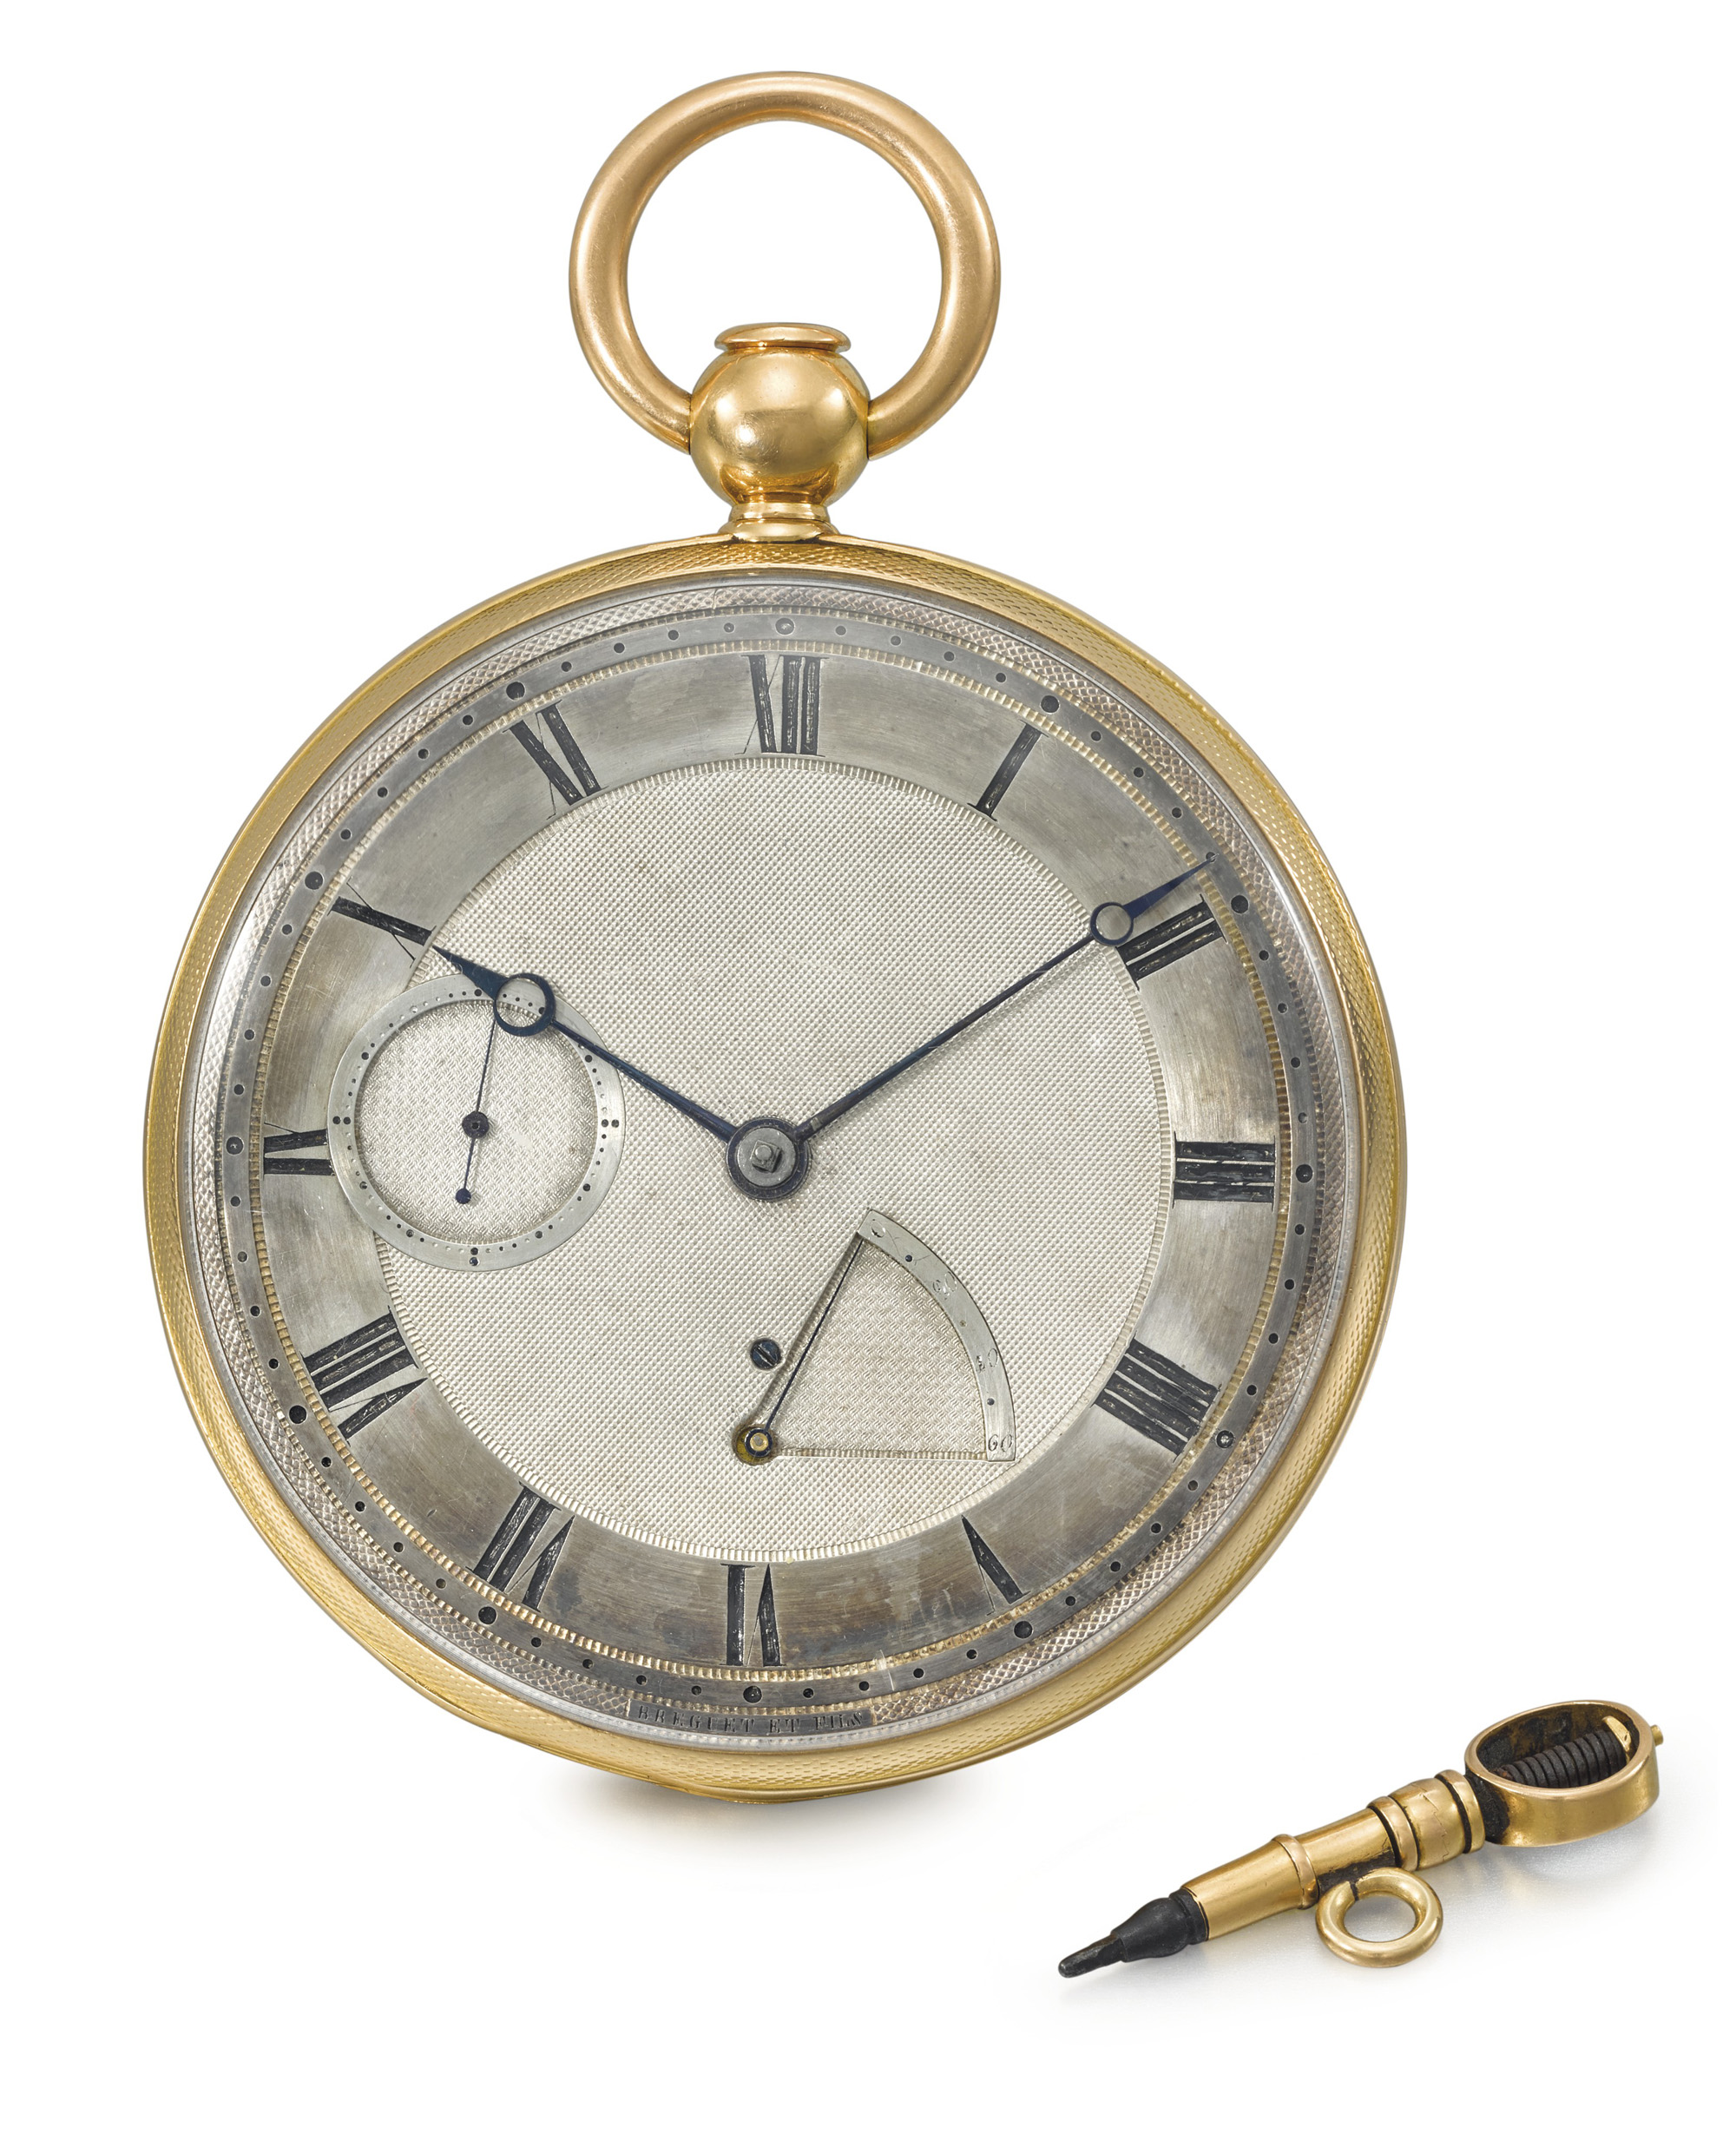 The Breguet no. 3105 has been consigned by a descendant of the watches original owner, the second Earl of Lucan. The watch is an extremely fine and important, possibly unique, minute repeating on gong and quarters à toc, jump-hour watch with equation of time chart.